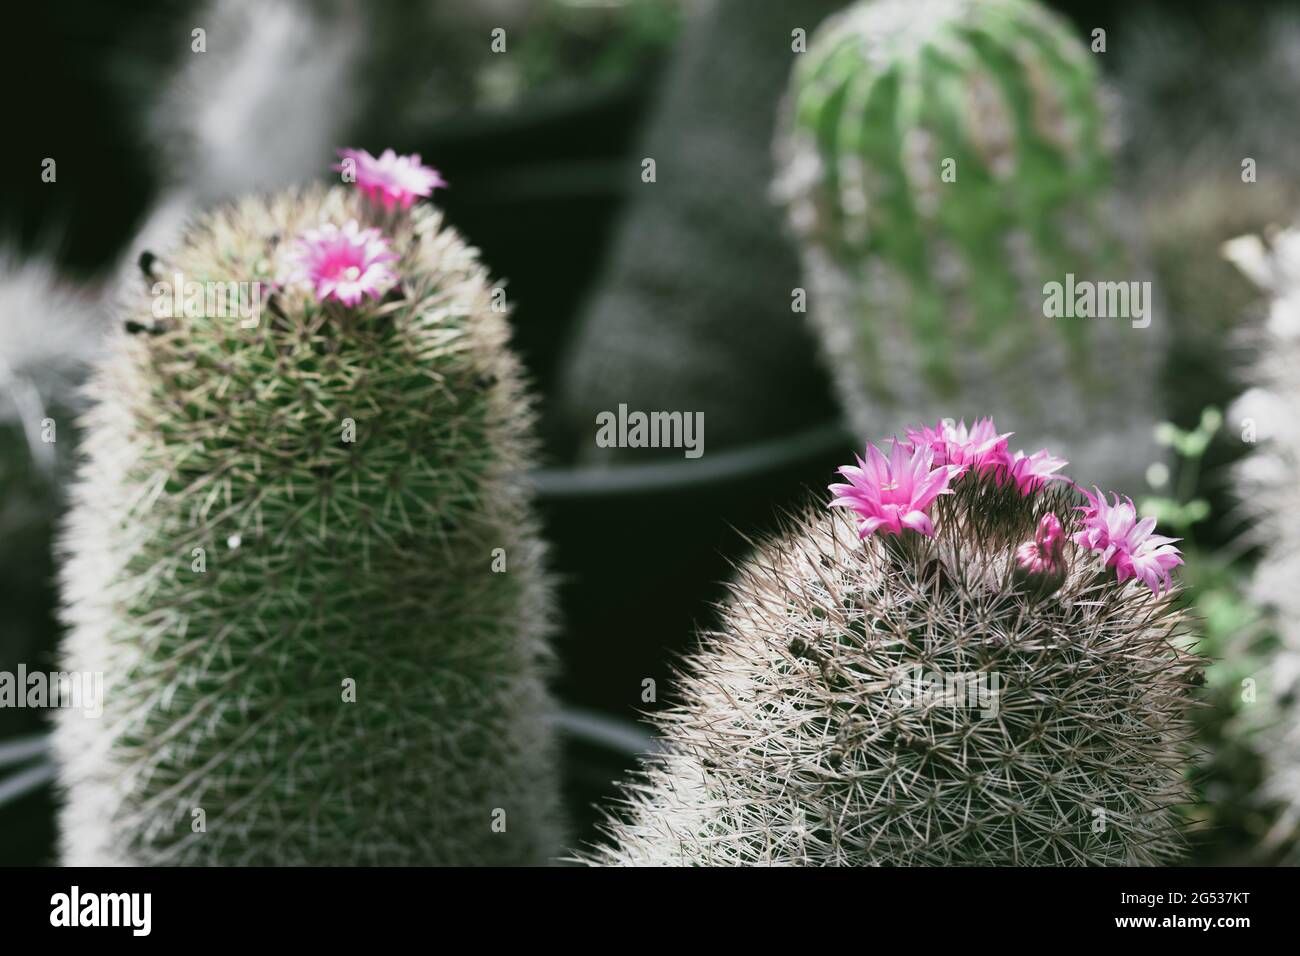 green Mammillaria cactus, a special type with pink flowers, on a blurred background Stock Photo